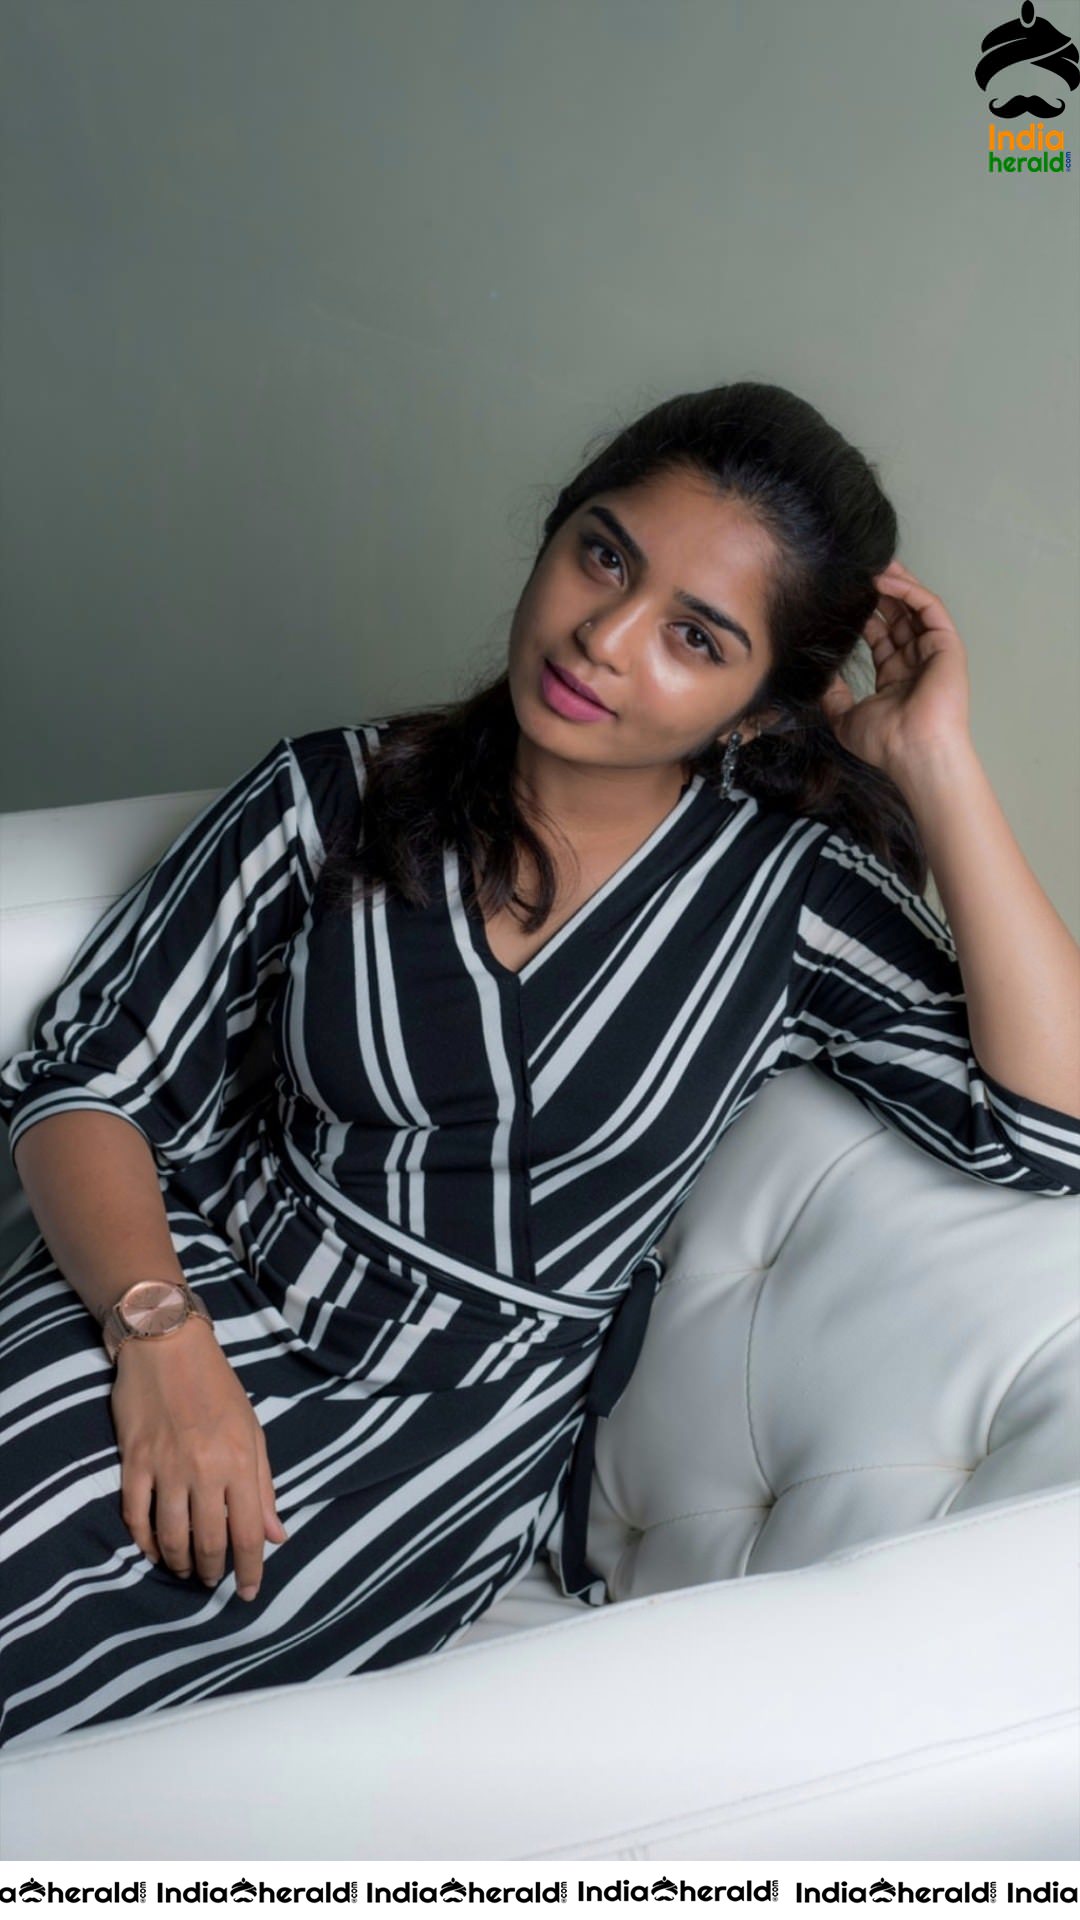 Latest Photoshoot of Gouri G Kishan in a Black and White Striped Attire